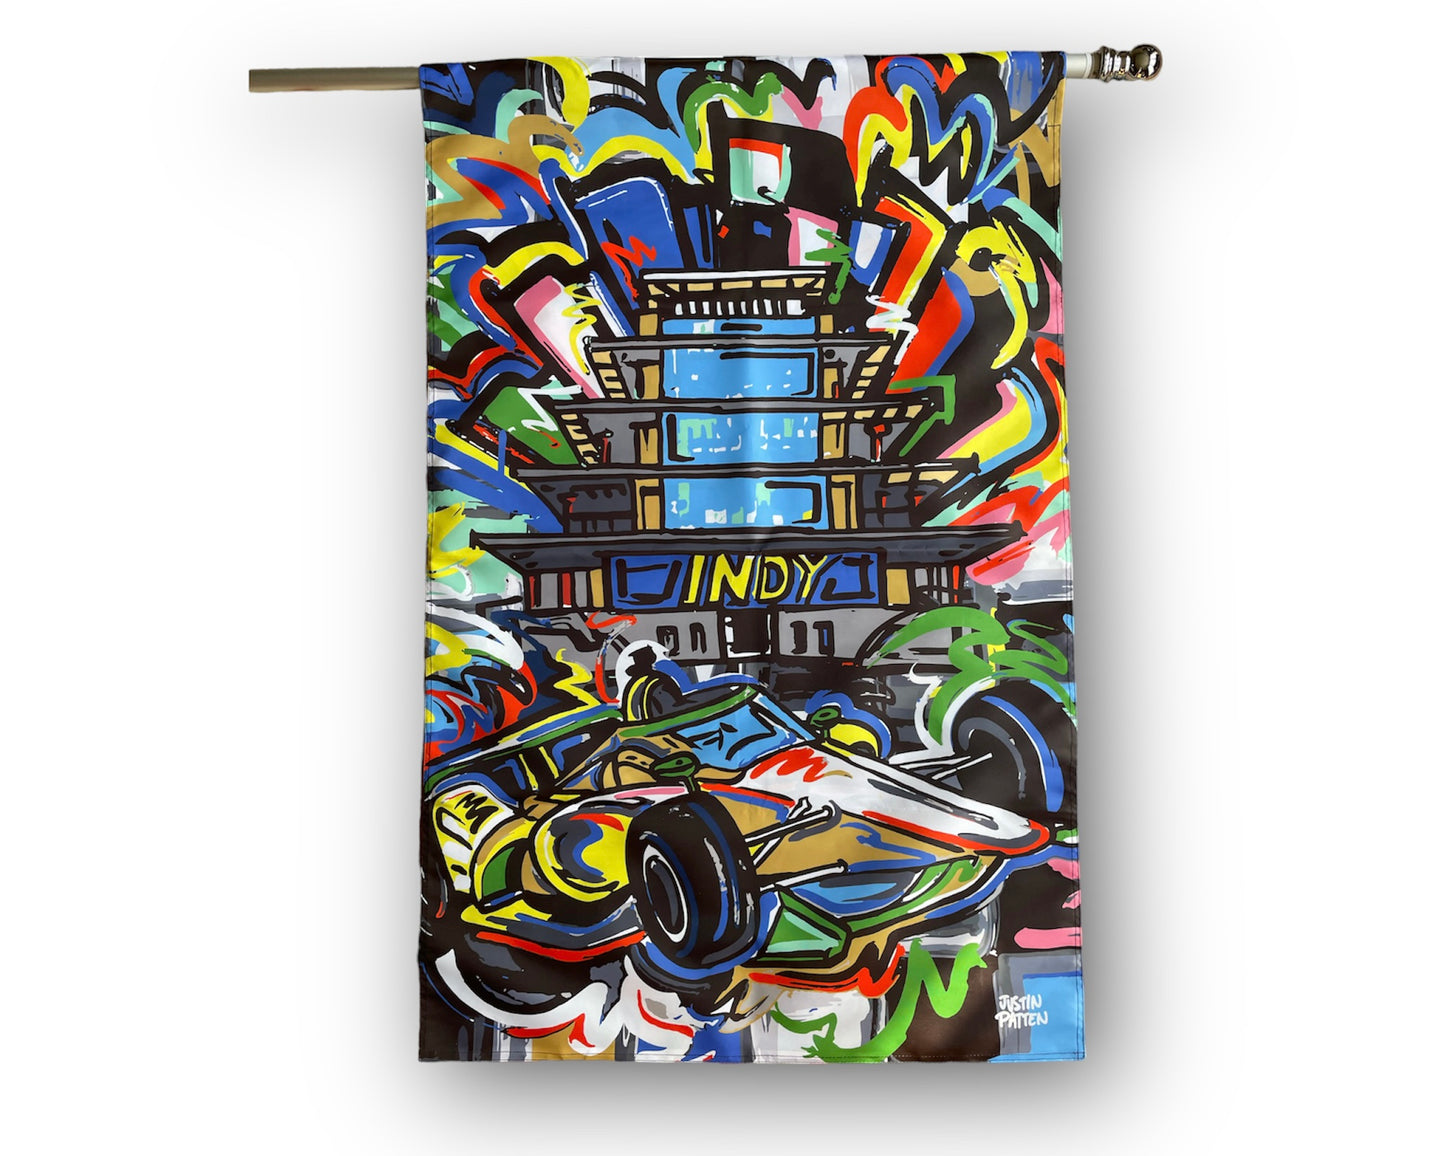 Indianapolis Motor Speedway Pagoda House Flag (28"x 42" in) by Justin Patten